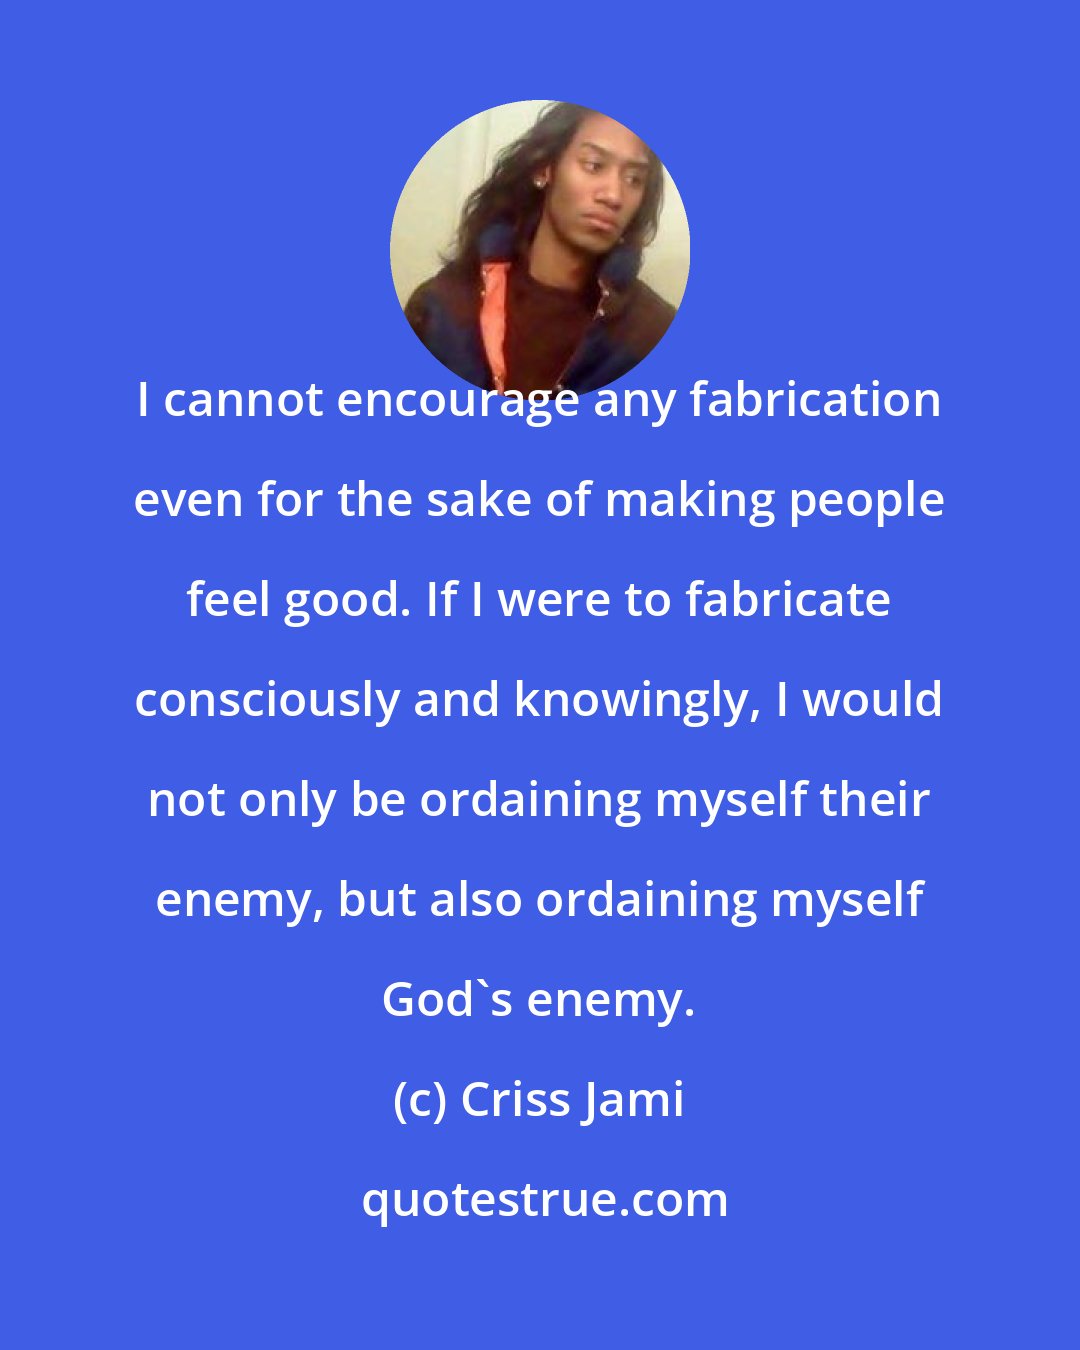 Criss Jami: I cannot encourage any fabrication even for the sake of making people feel good. If I were to fabricate consciously and knowingly, I would not only be ordaining myself their enemy, but also ordaining myself God's enemy.